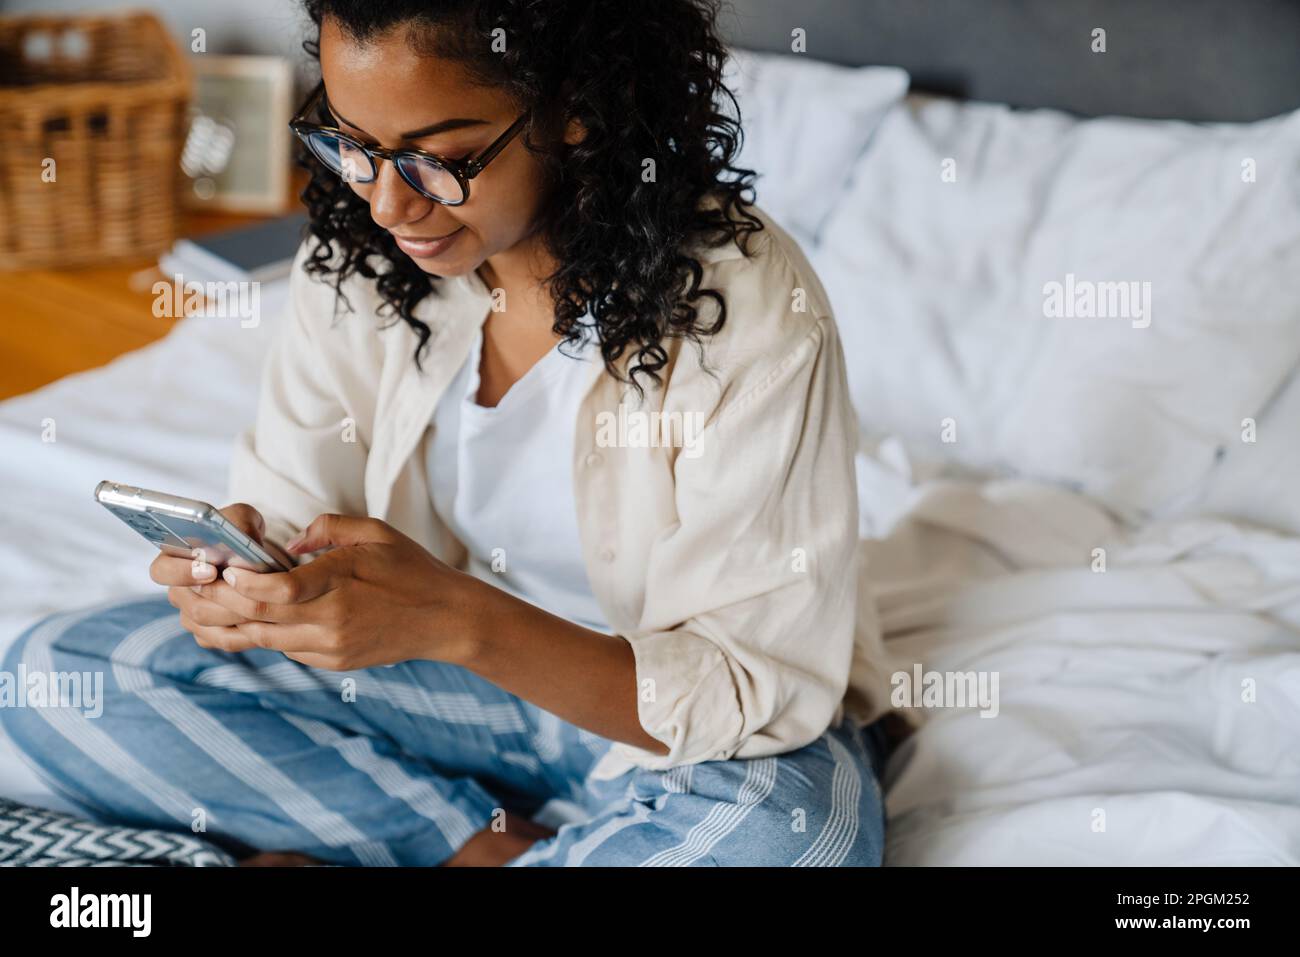 Black young woman in eyeglasses using mobile phone while resting on bed at home Stock Photo